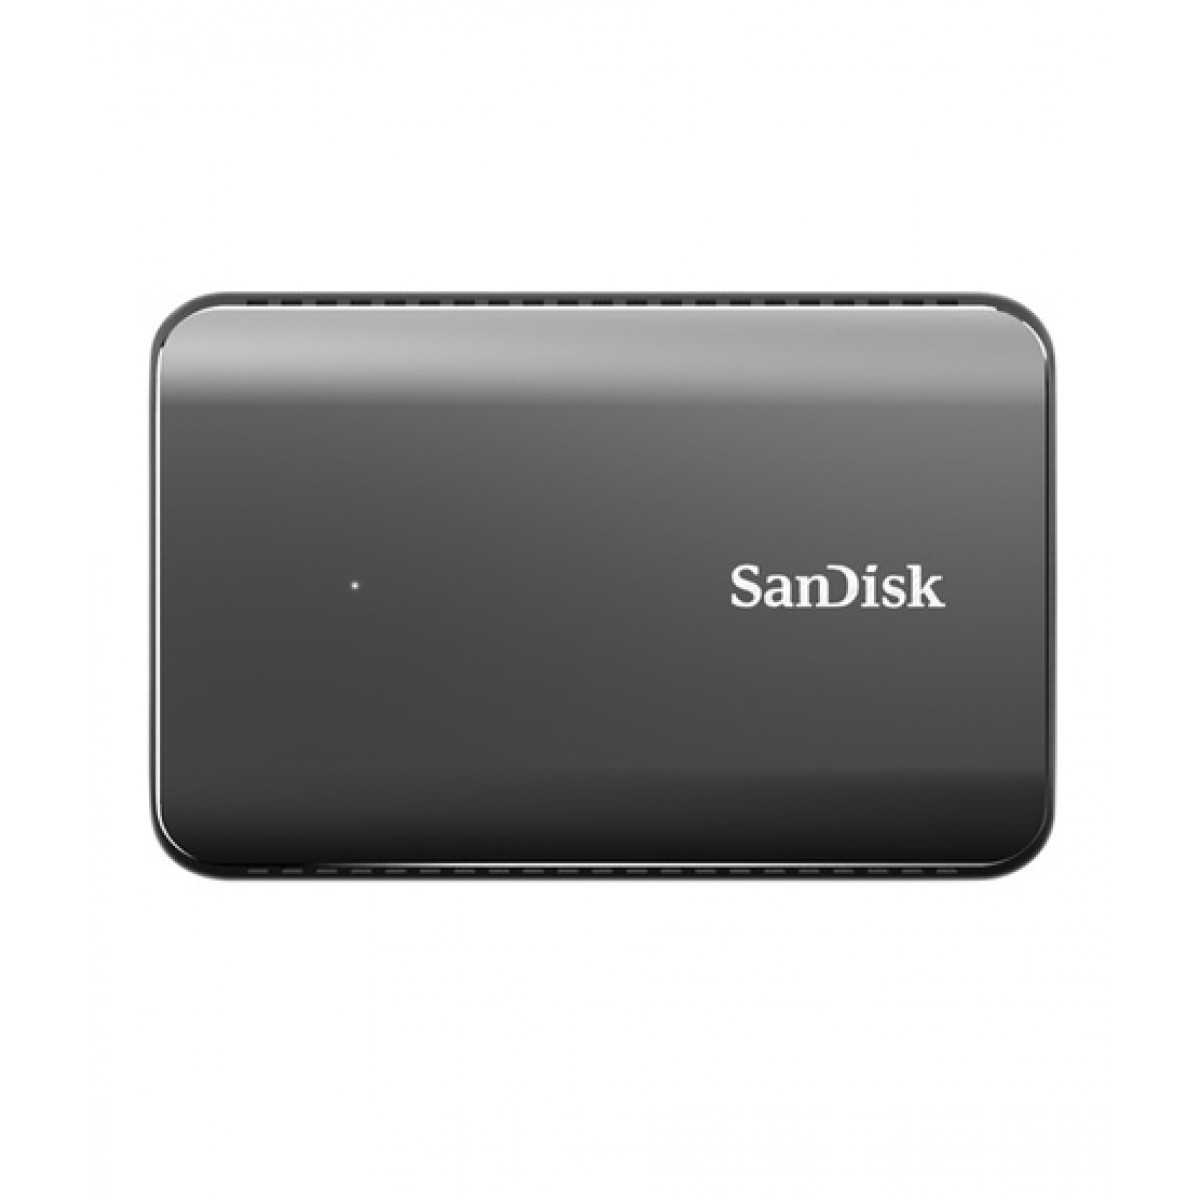 SanDisk Extreme 900 1.92TB Portable SSD